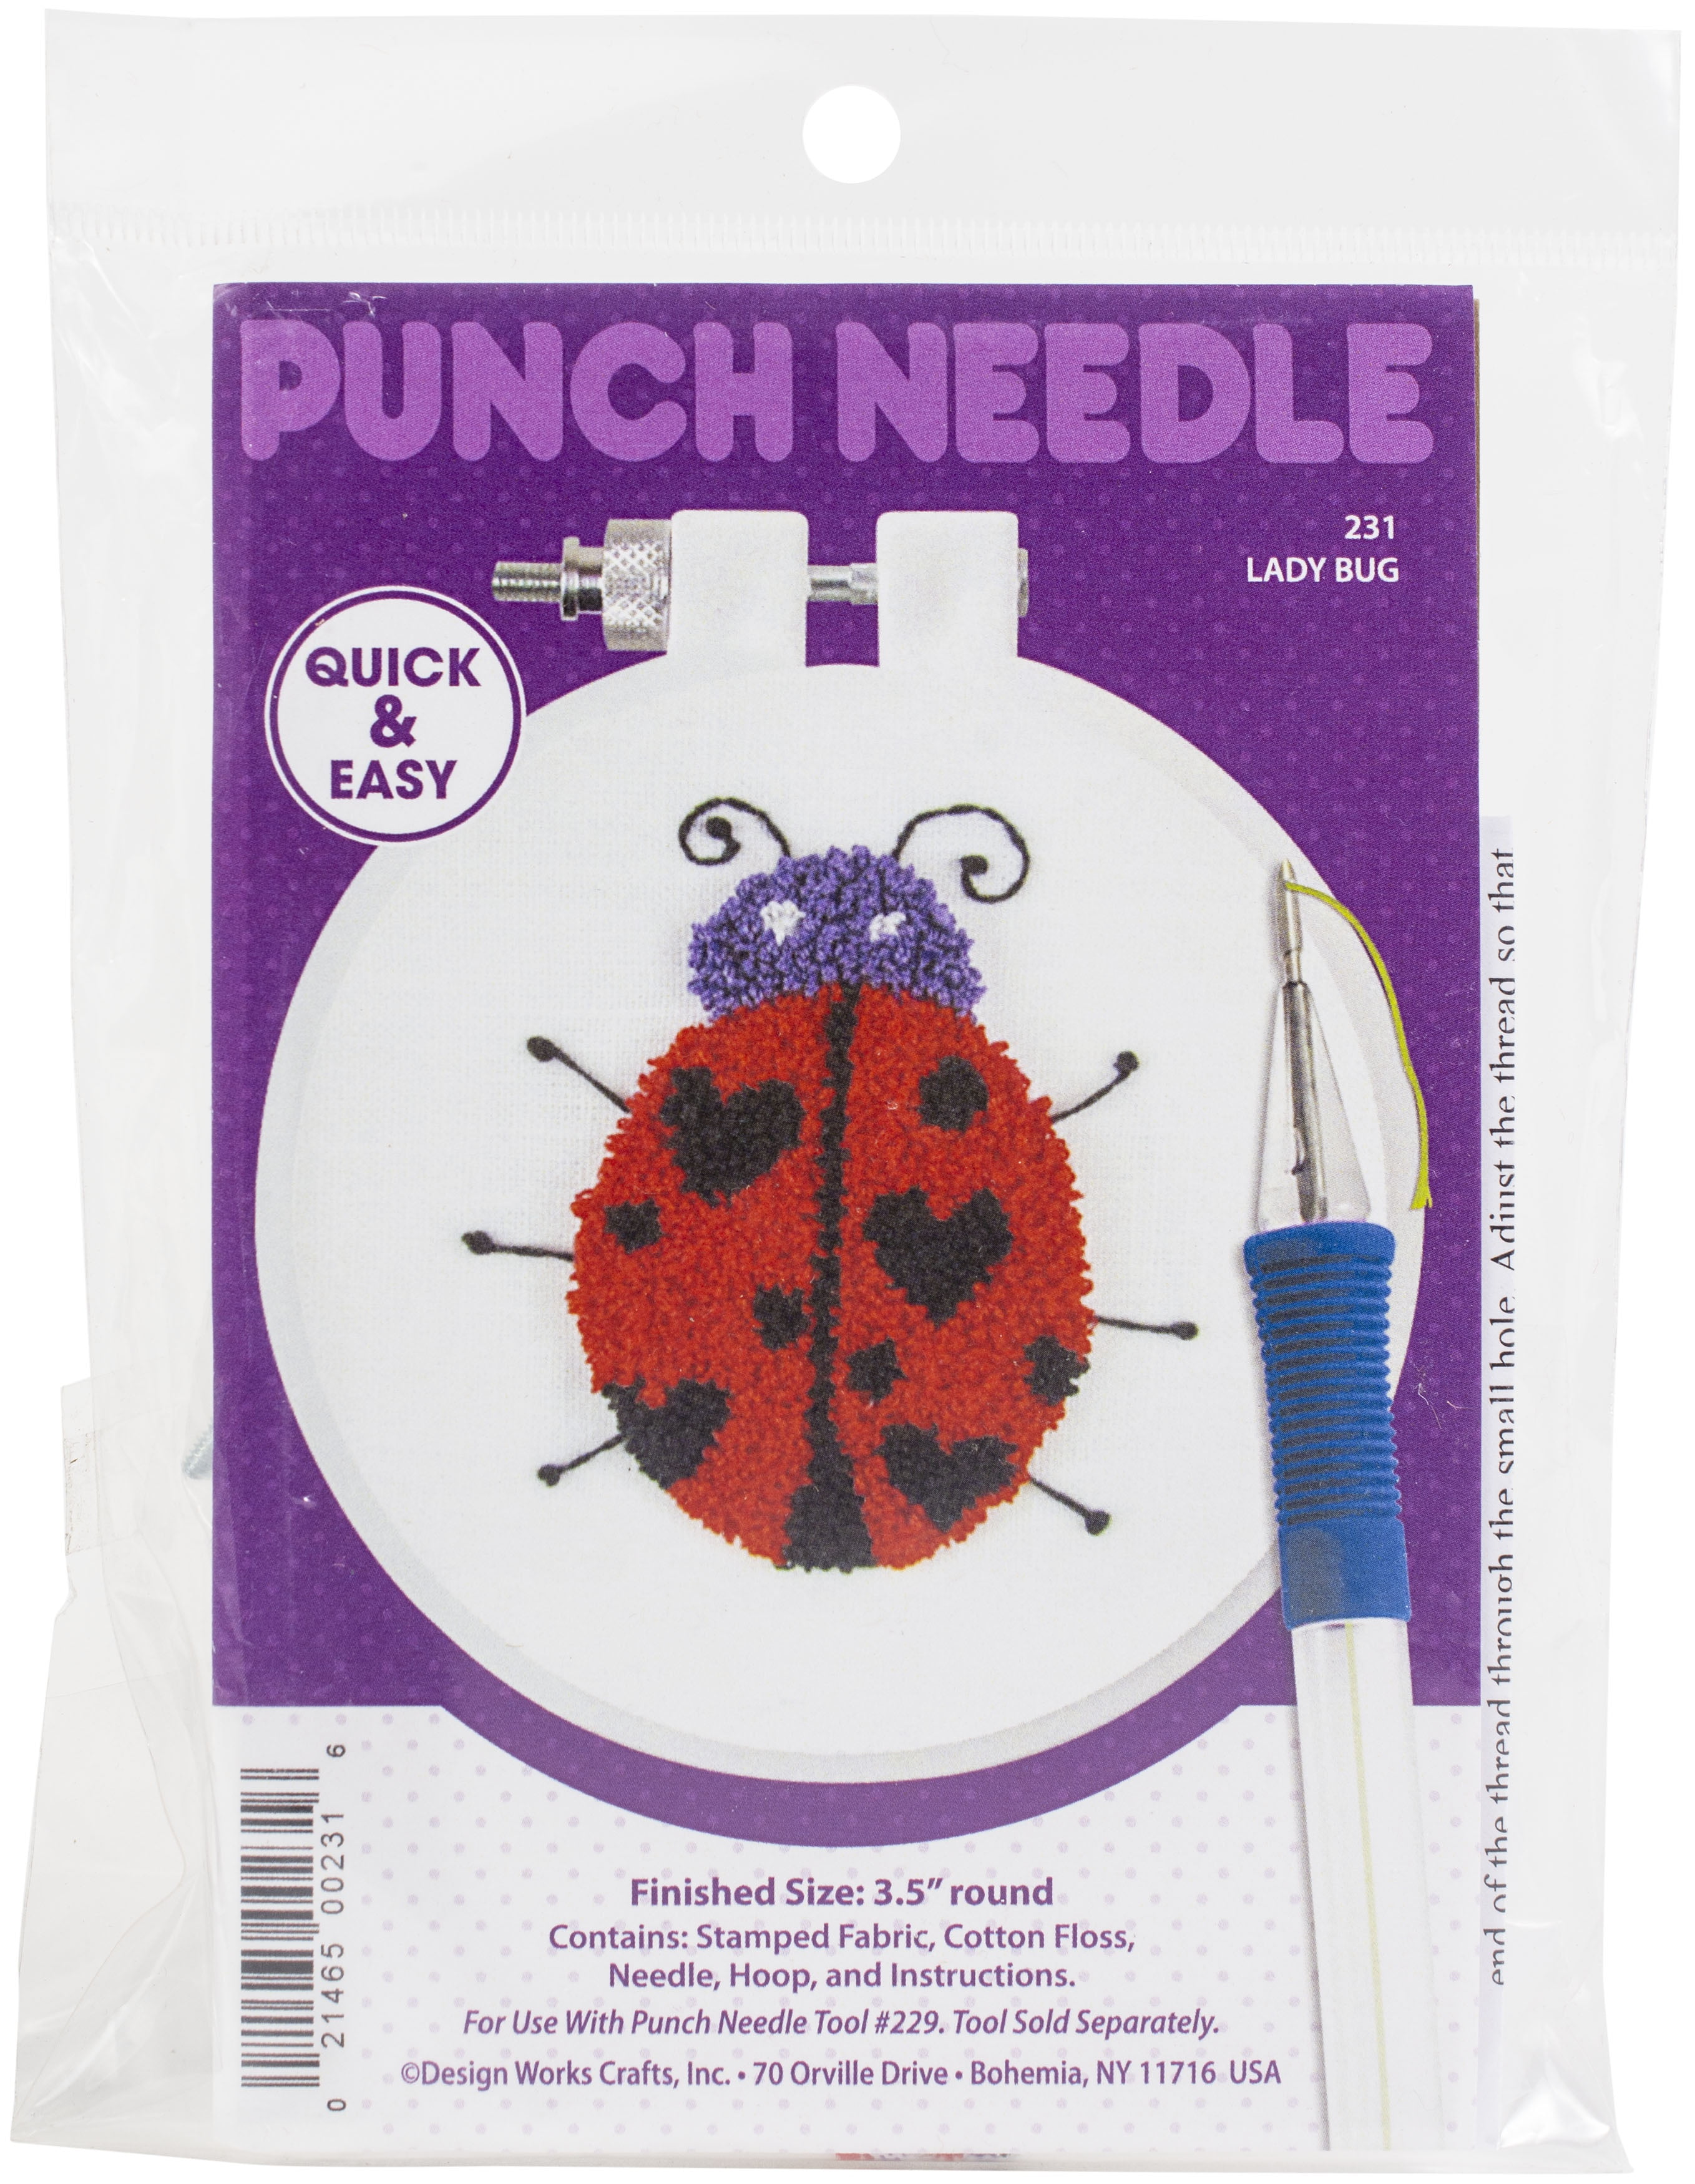 Embroidery Stitching Punch Needle Embroidery Kit Craft Tool Set Including  50 Color Threads for DIY Sewing Embroidery Cross Stitch Kits and Knitting  Sewing Tool 